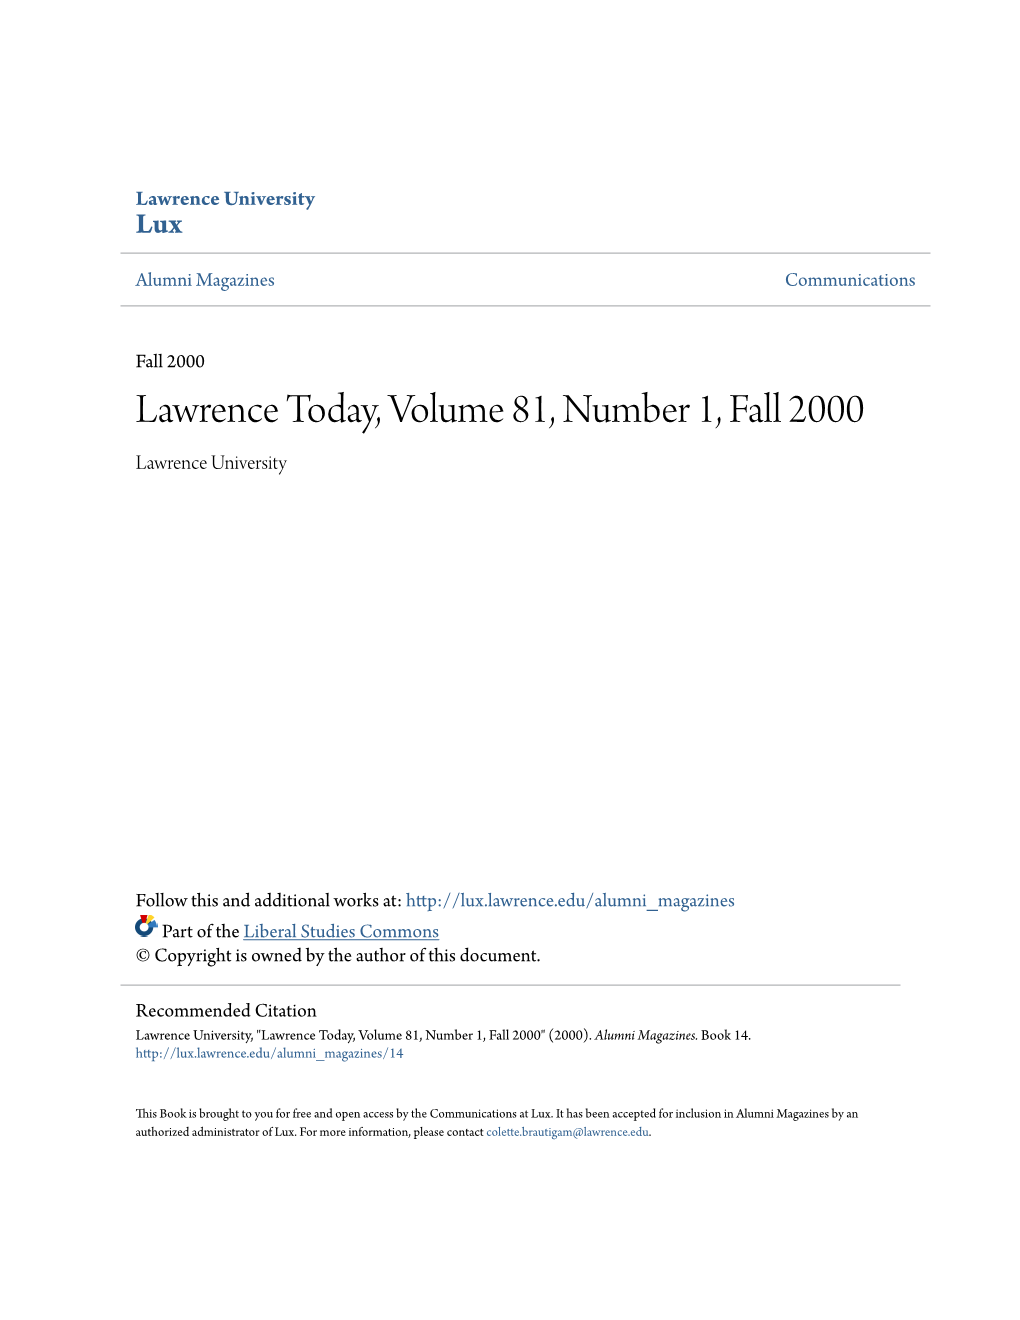 Lawrence Today, Volume 81, Number 1, Fall 2000 Lawrence University